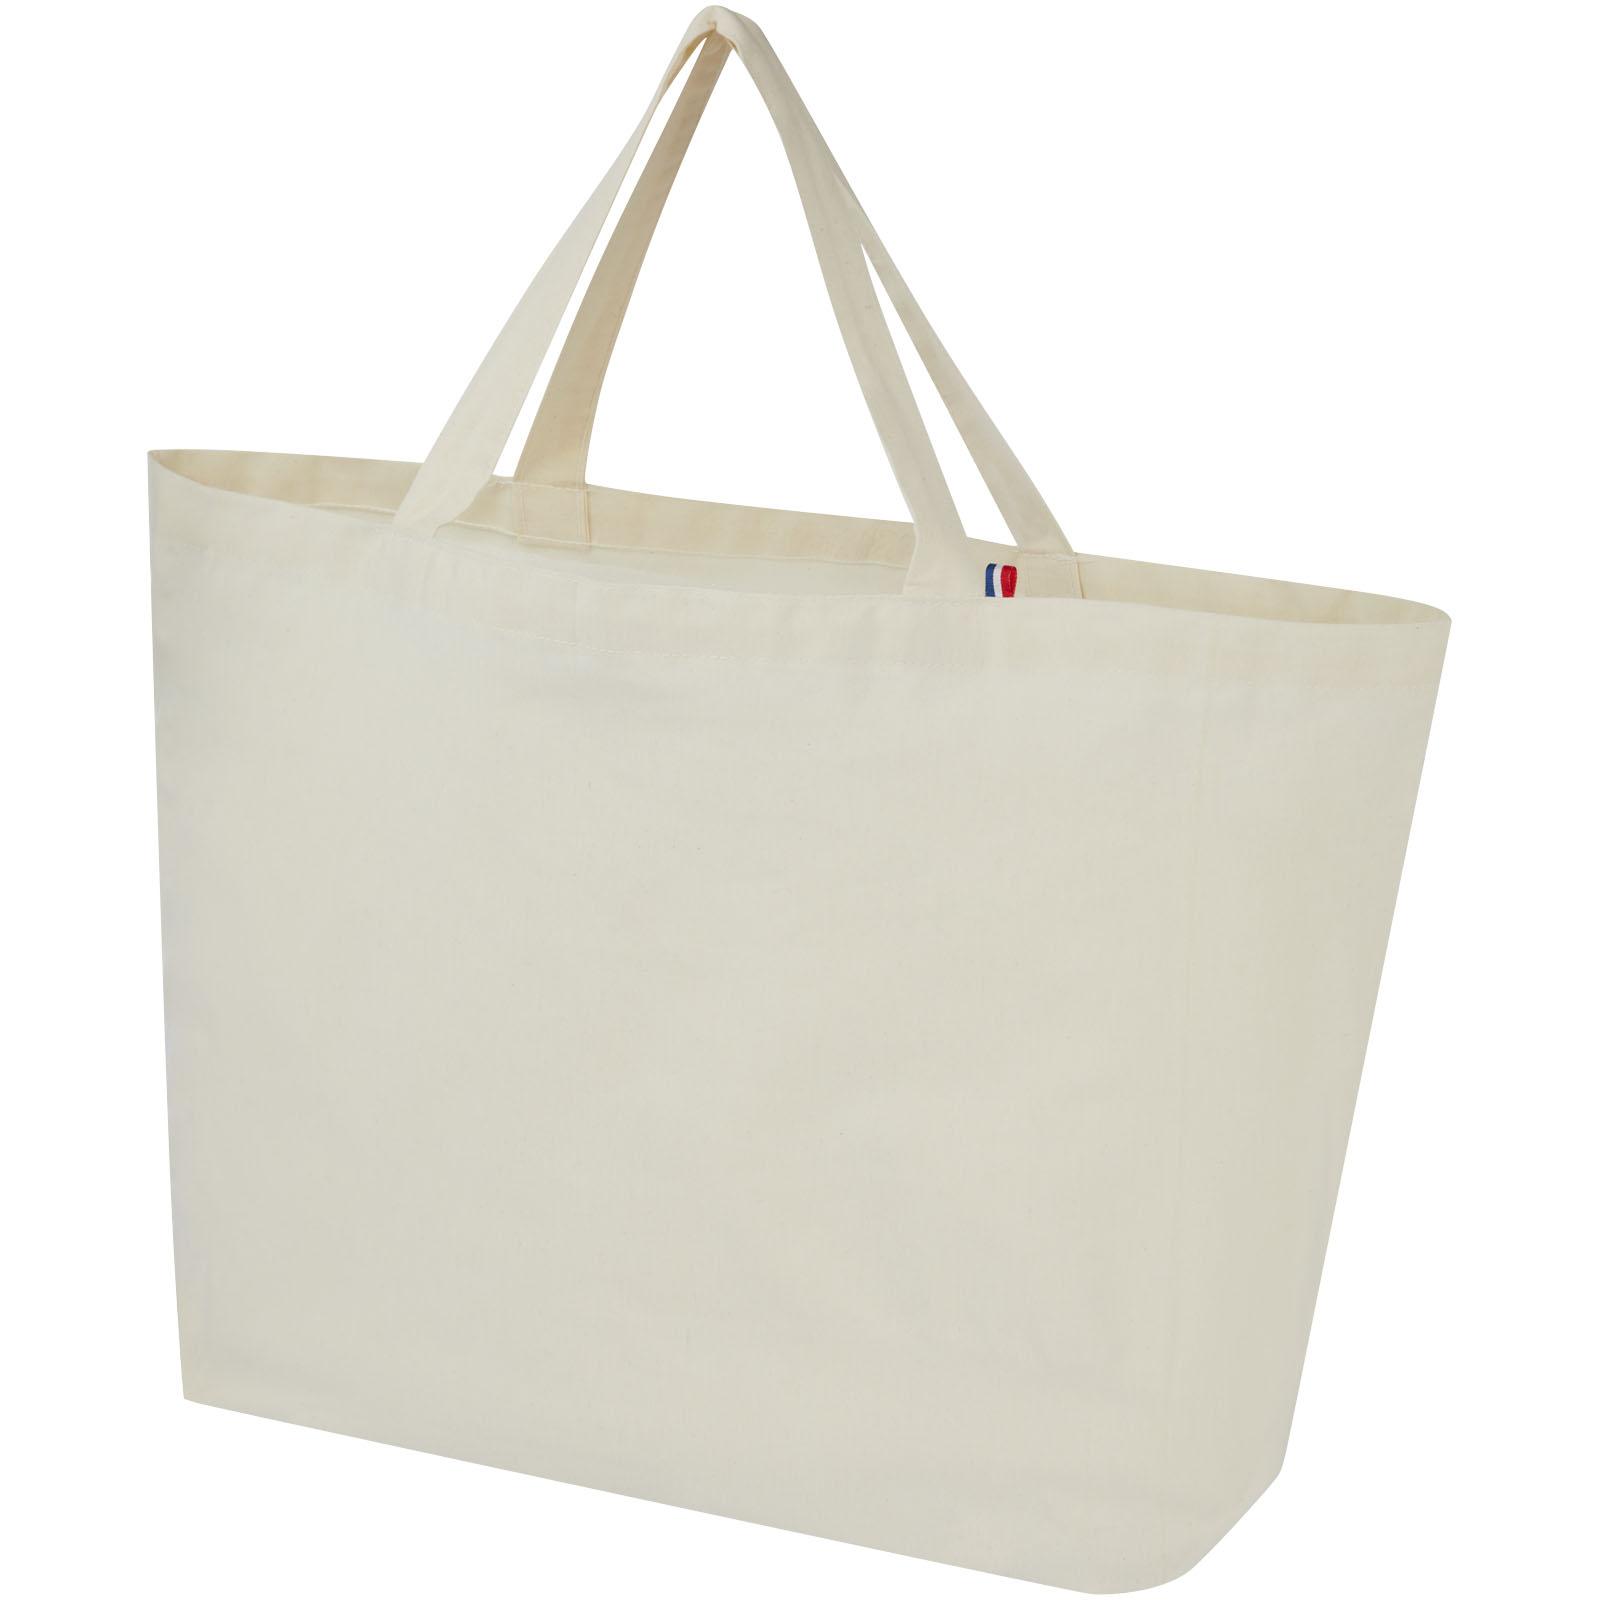 Advertising Shopping & Tote Bags - Cannes 200 g/m2 recycled shopper tote bag 10L